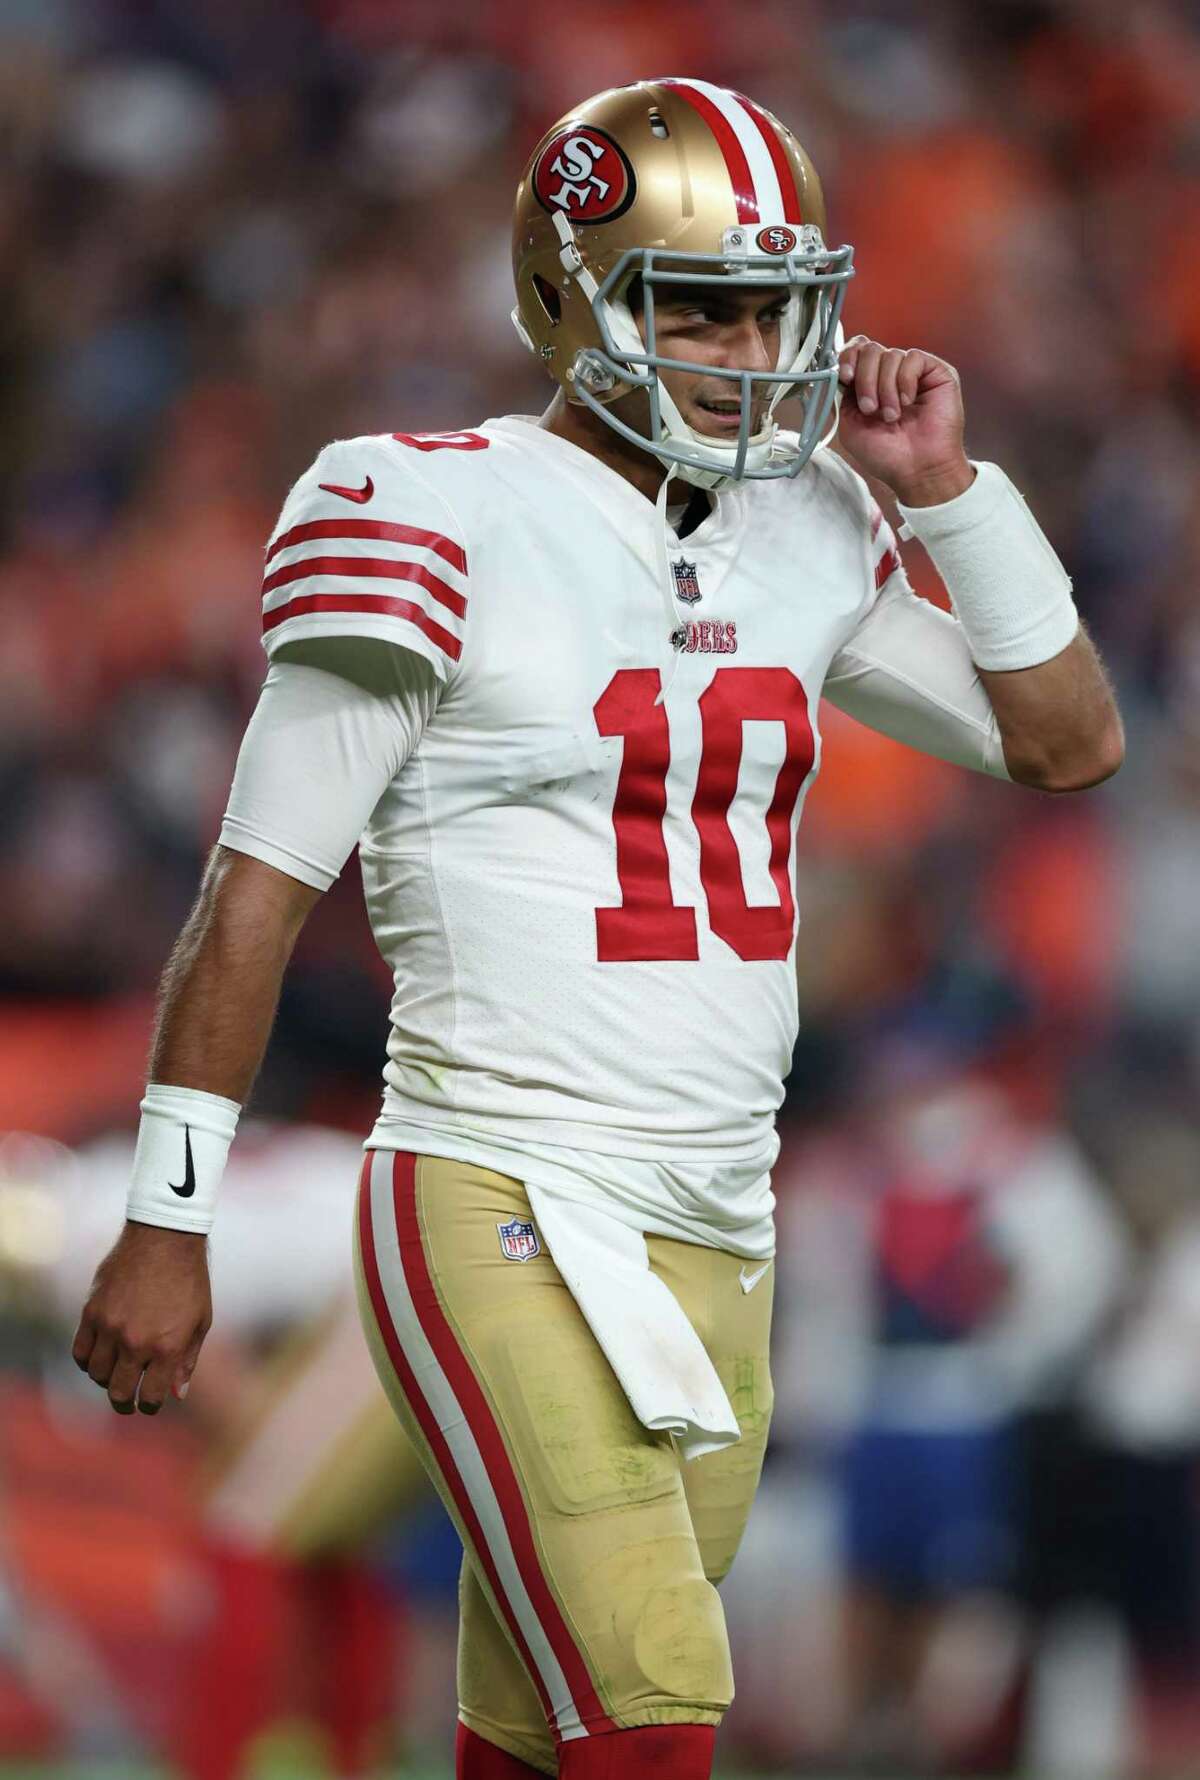 DENVER, COLORADO - SEPTEMBER 25: Jimmy Garoppolo #10 of the San Francisco 49ers reacts after giving up a safety during the third quarter against the Denver Broncos at Empower Field At Mile High on September 25, 2022 in Denver, Colorado. (Photo by Matthew Stockman/Getty Images)